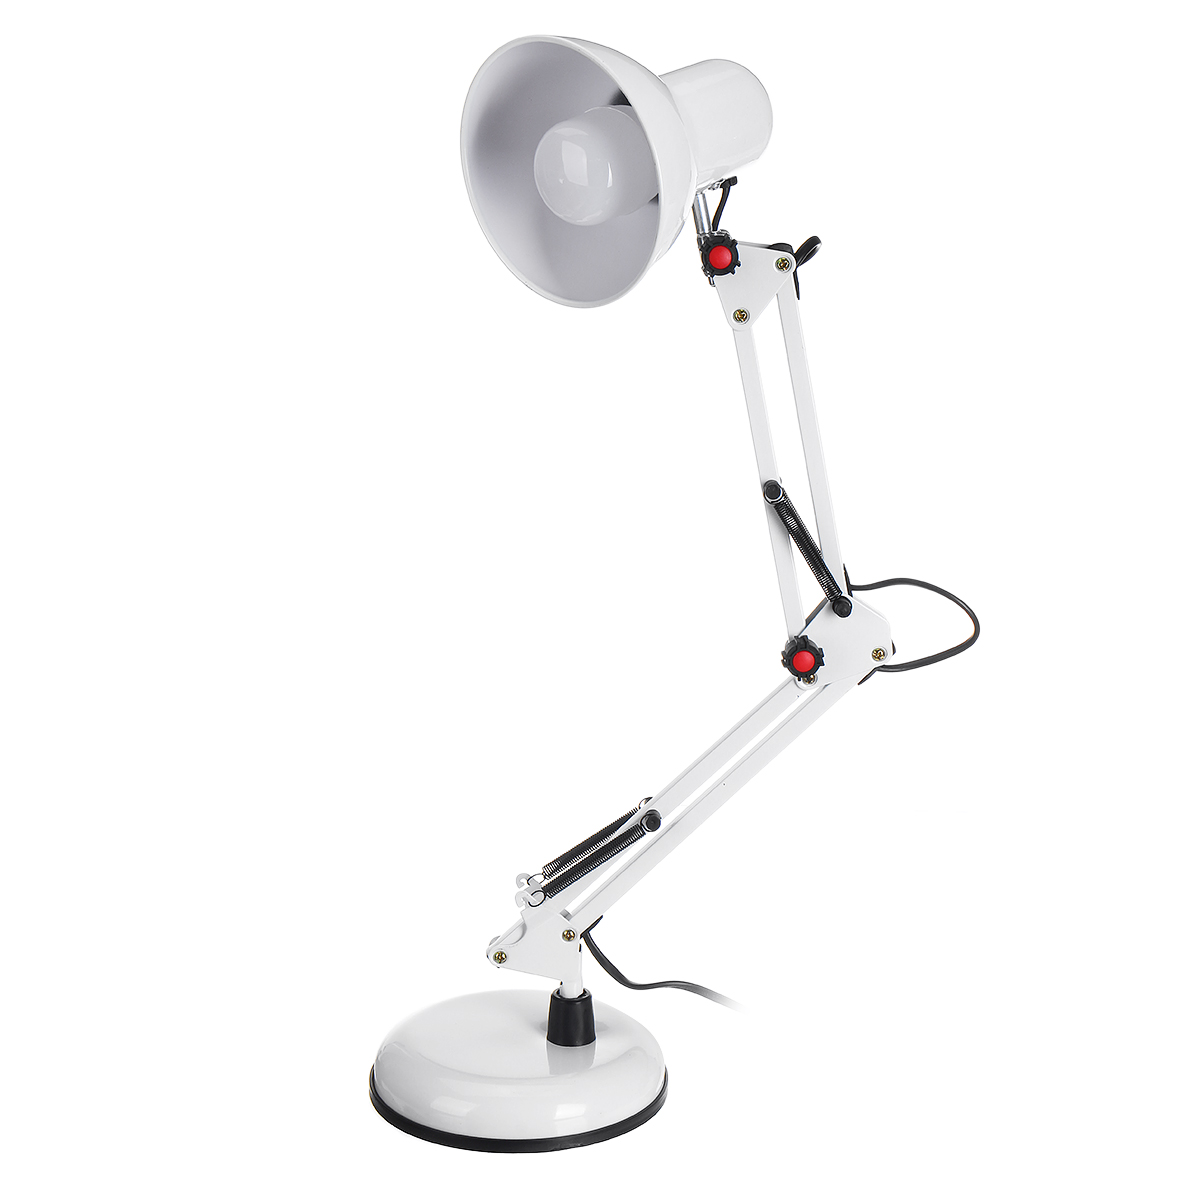 5W-Super-Bright-Swing-Arm-Desk-Lamp-Clamp-on-Table-Light-with-LED-Bulb-Metal-Clip-220V-1742397-13